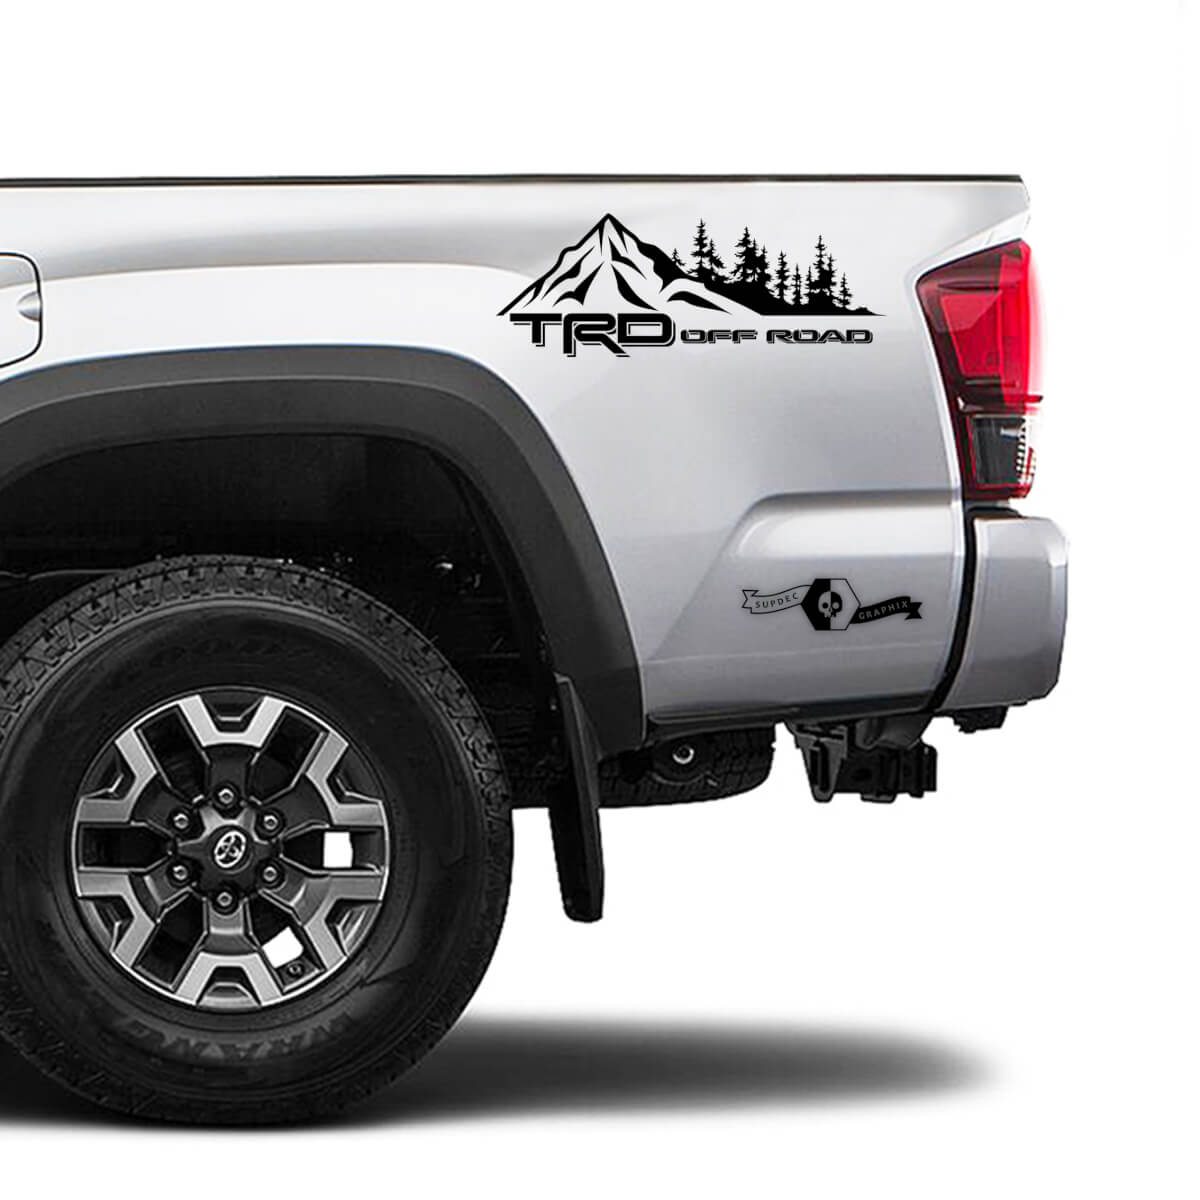 TRD 4x4 Off Road TOYOTA Forest Mountain Decals Stickers for Tacoma Tundra 4Runner Hilux side